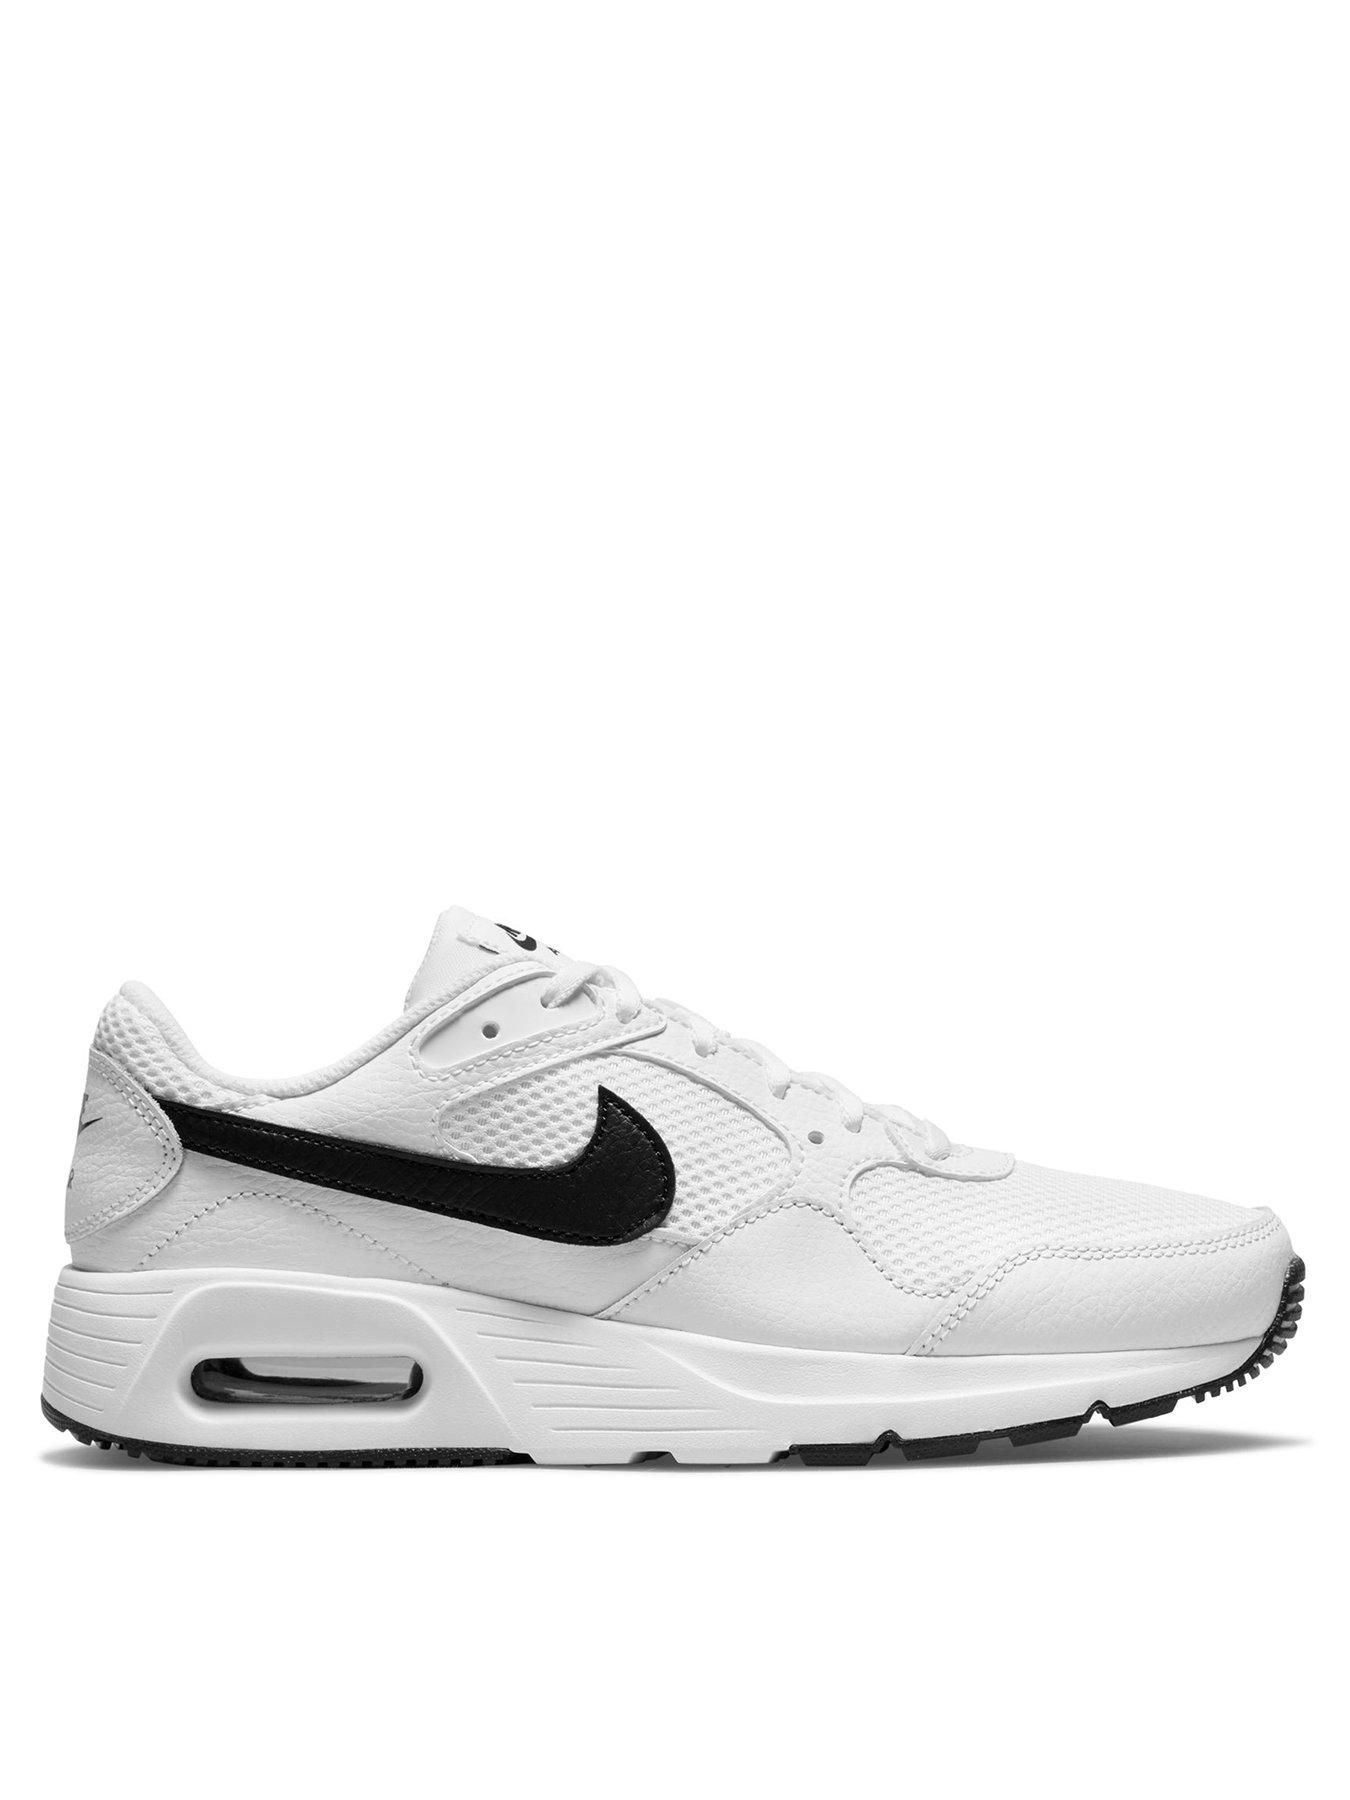 Nike Air Max SC Trainers - White/Black | littlewoods.com